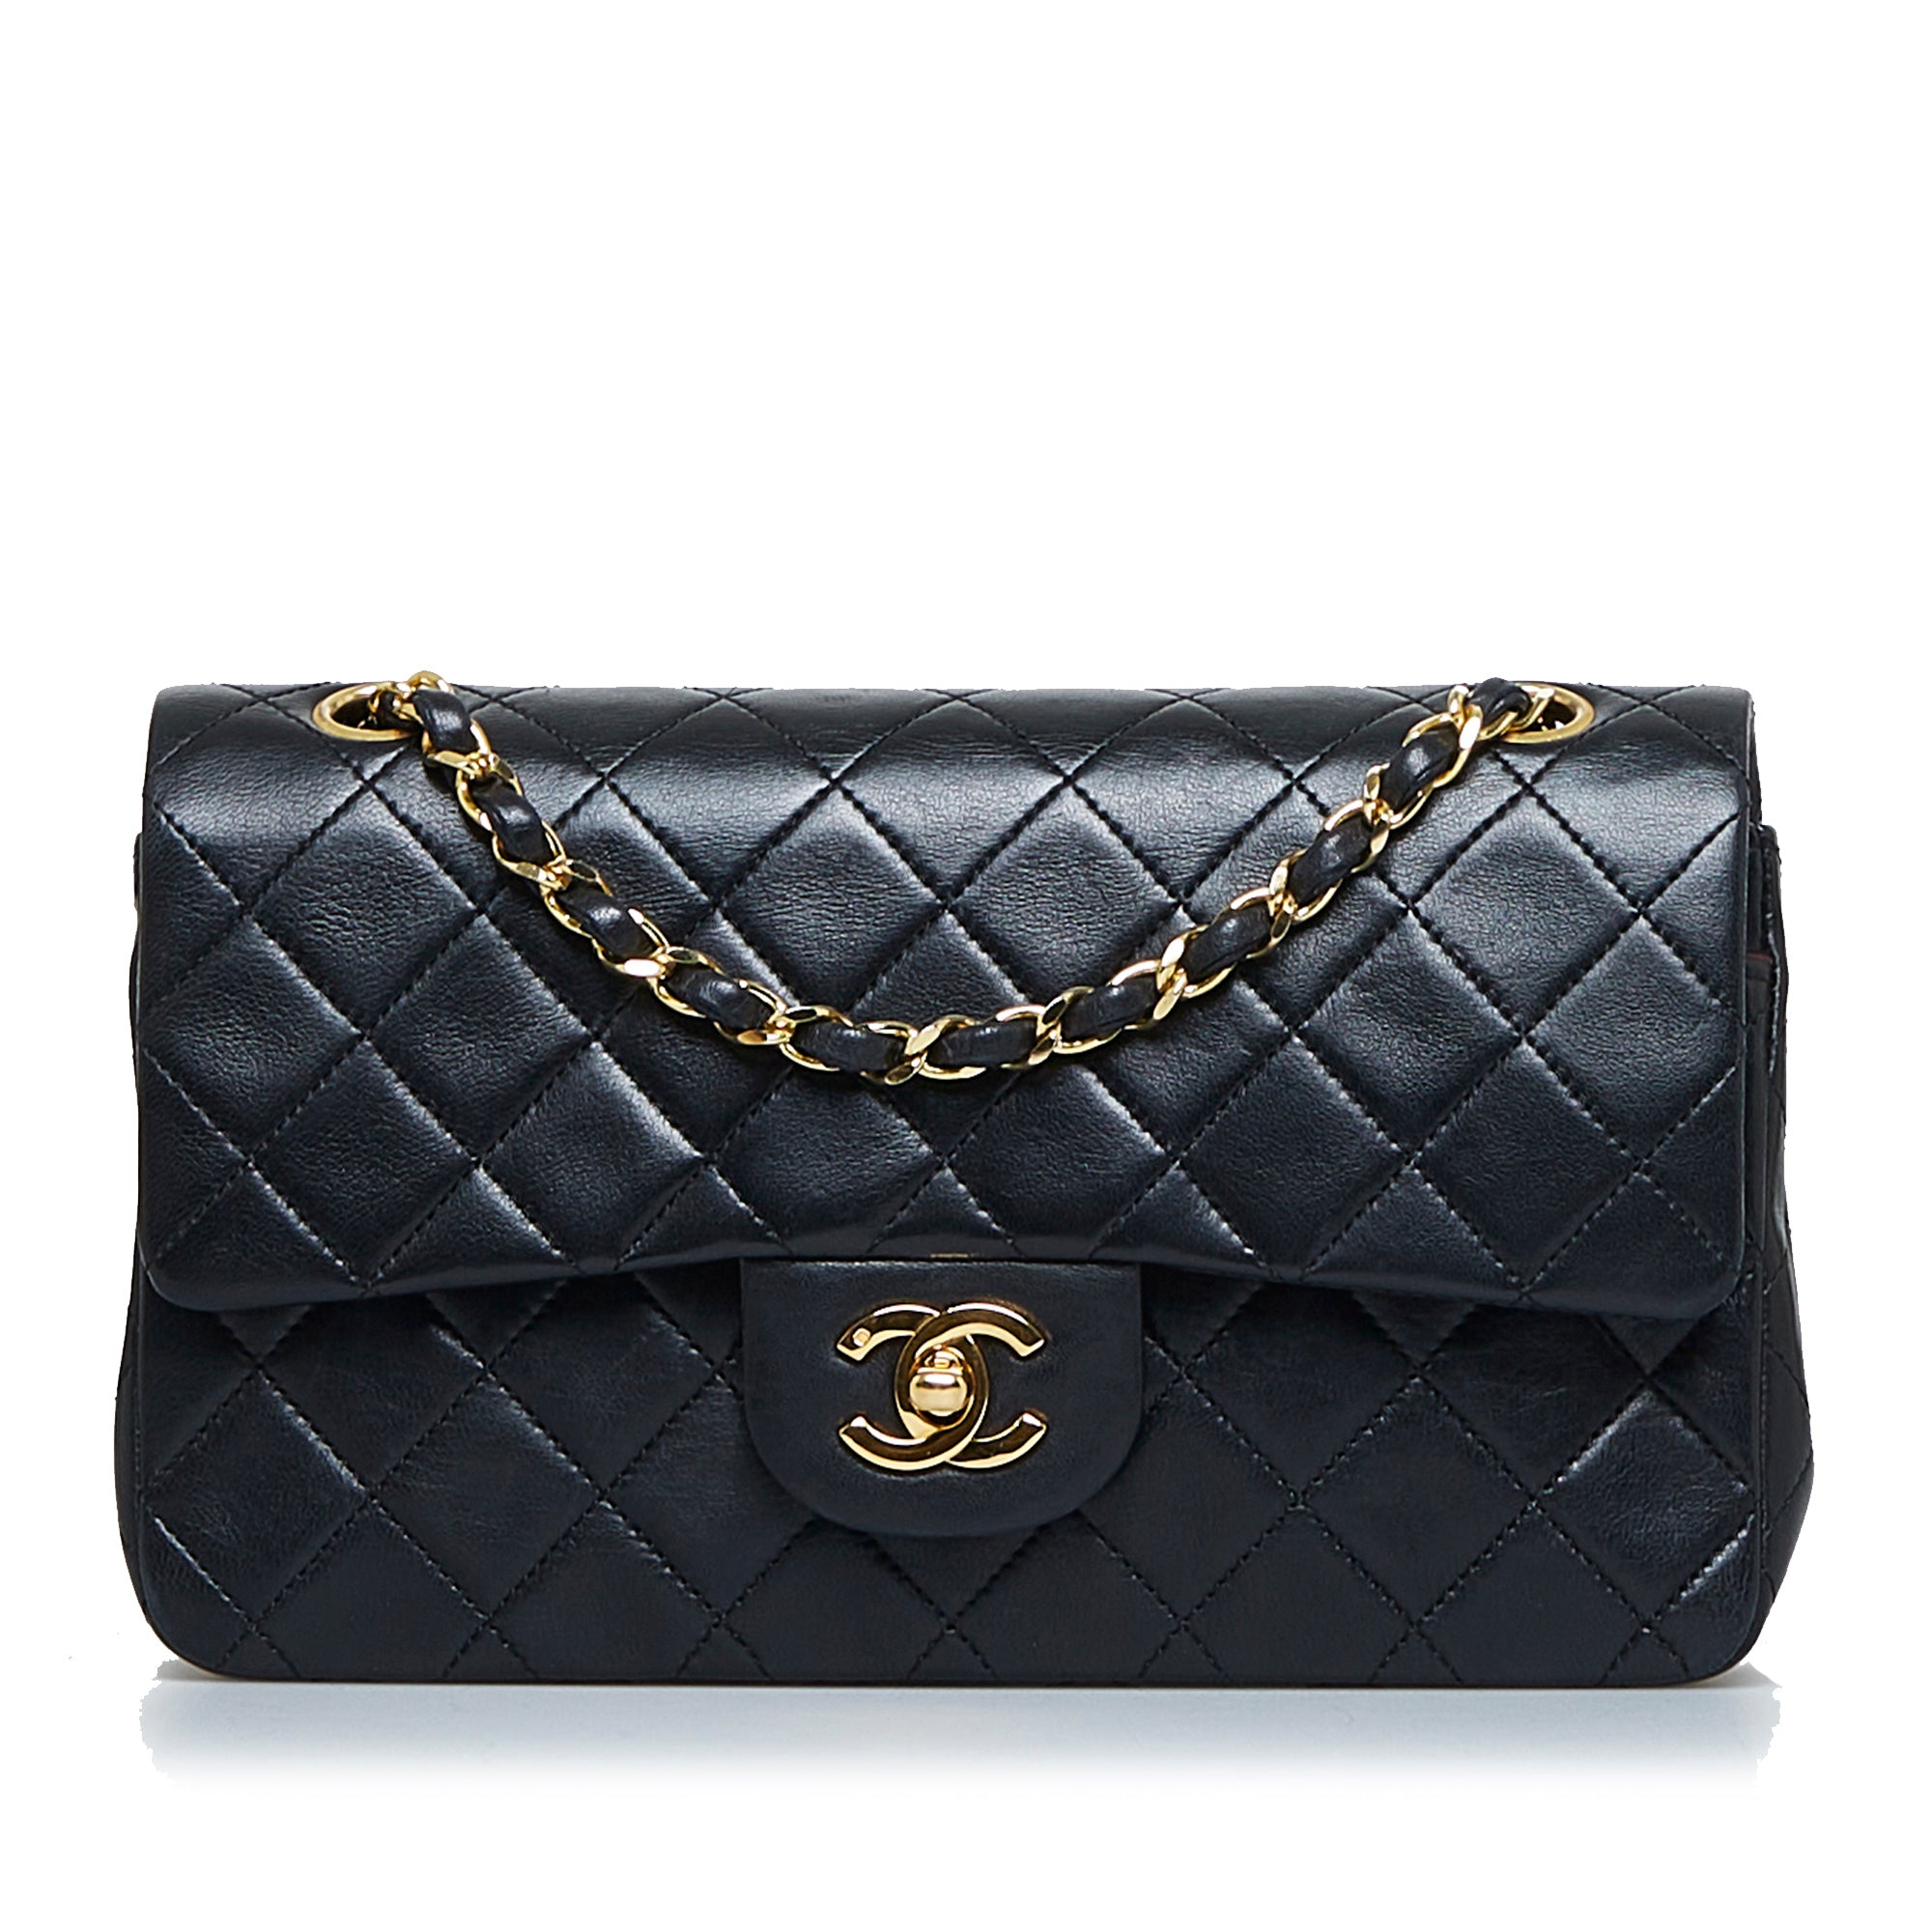 Chanel Caviar Leather Top Handle Flap Bag with SHW in Black